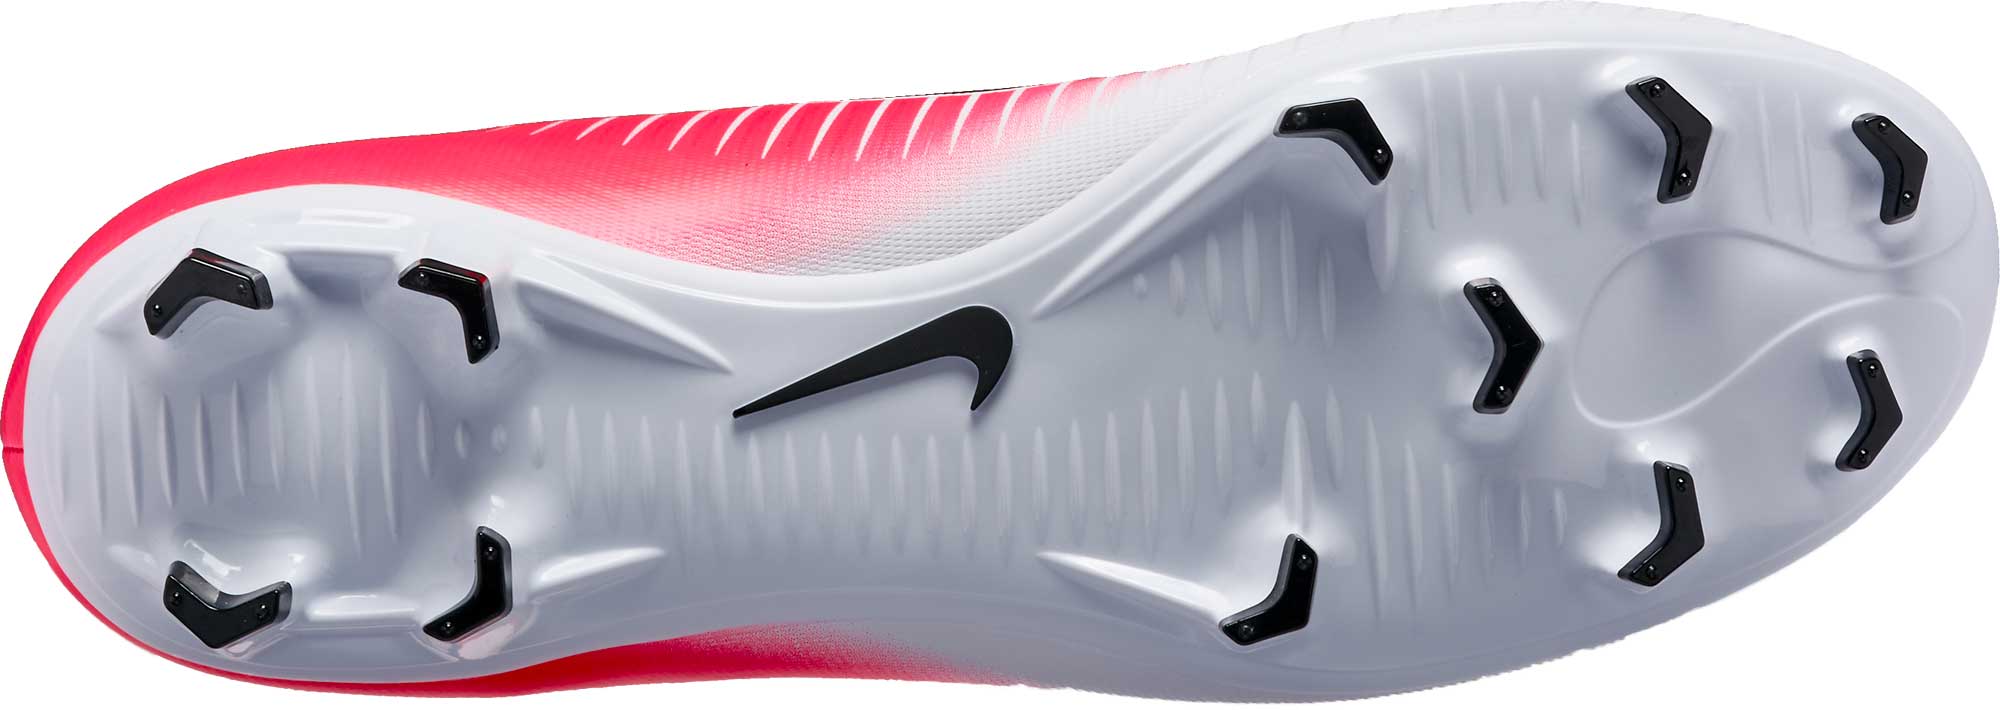 Whitney nudo asistente Nike Mercurial Victory VI - Pink Mercurial Cleats